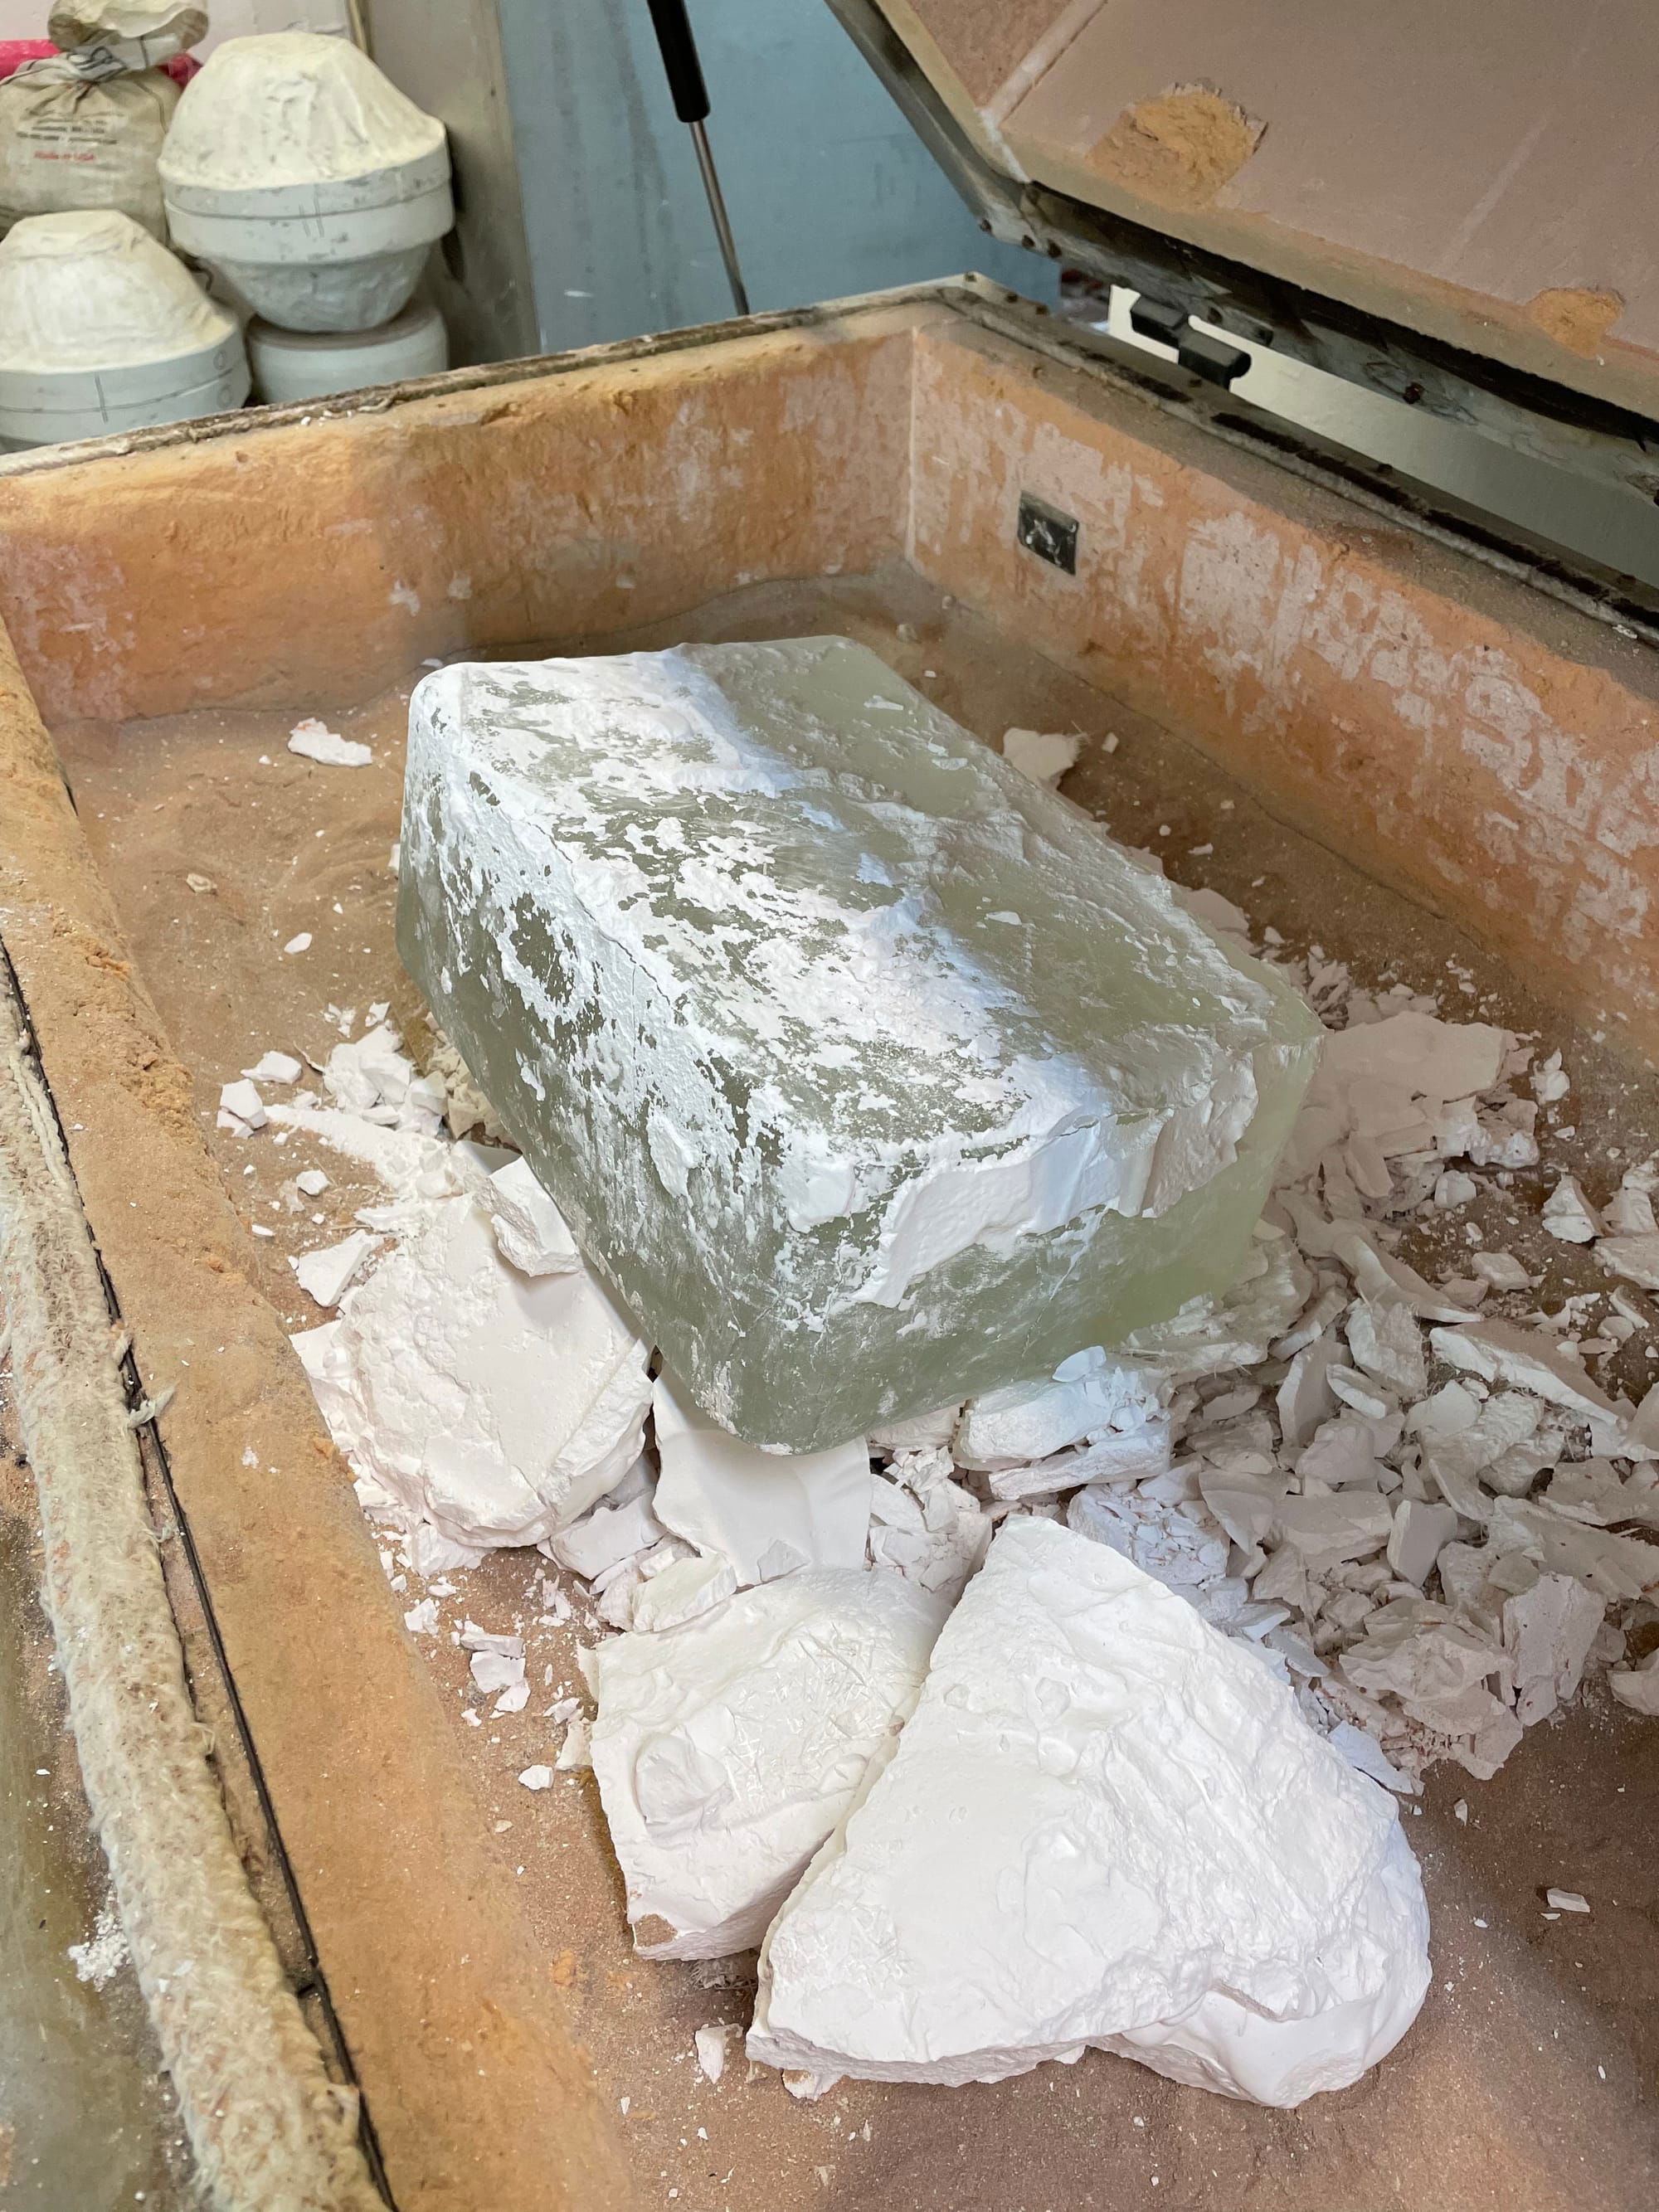 Cleaning after the firing